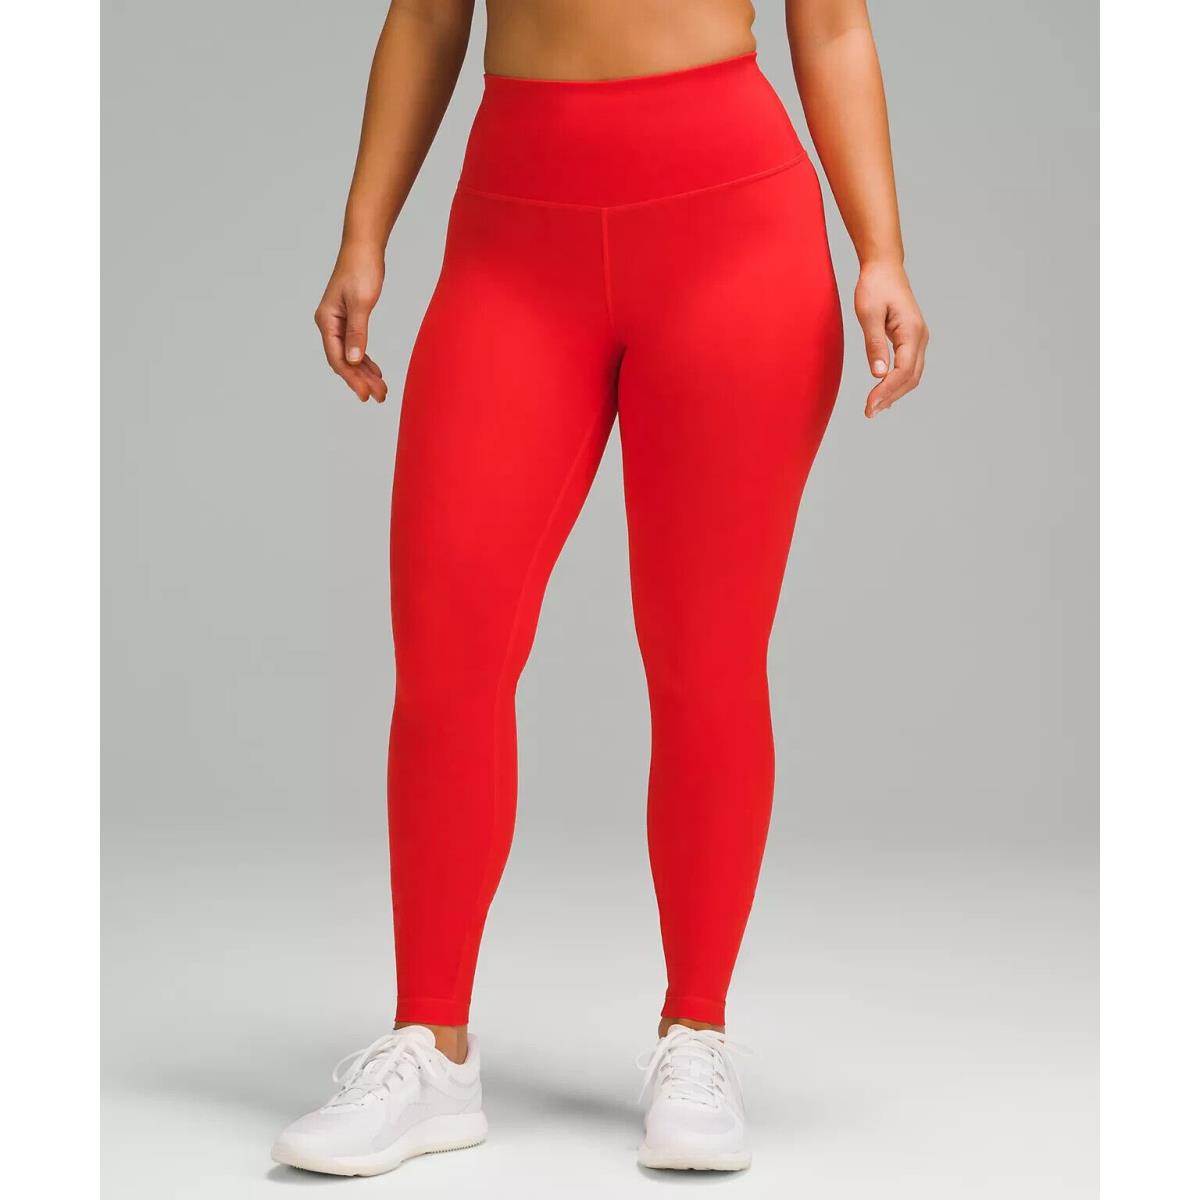 Lululemon Wunder Train High-rise Tight 28 Contour Fit Hot Heat Size 10. LW5EQBS